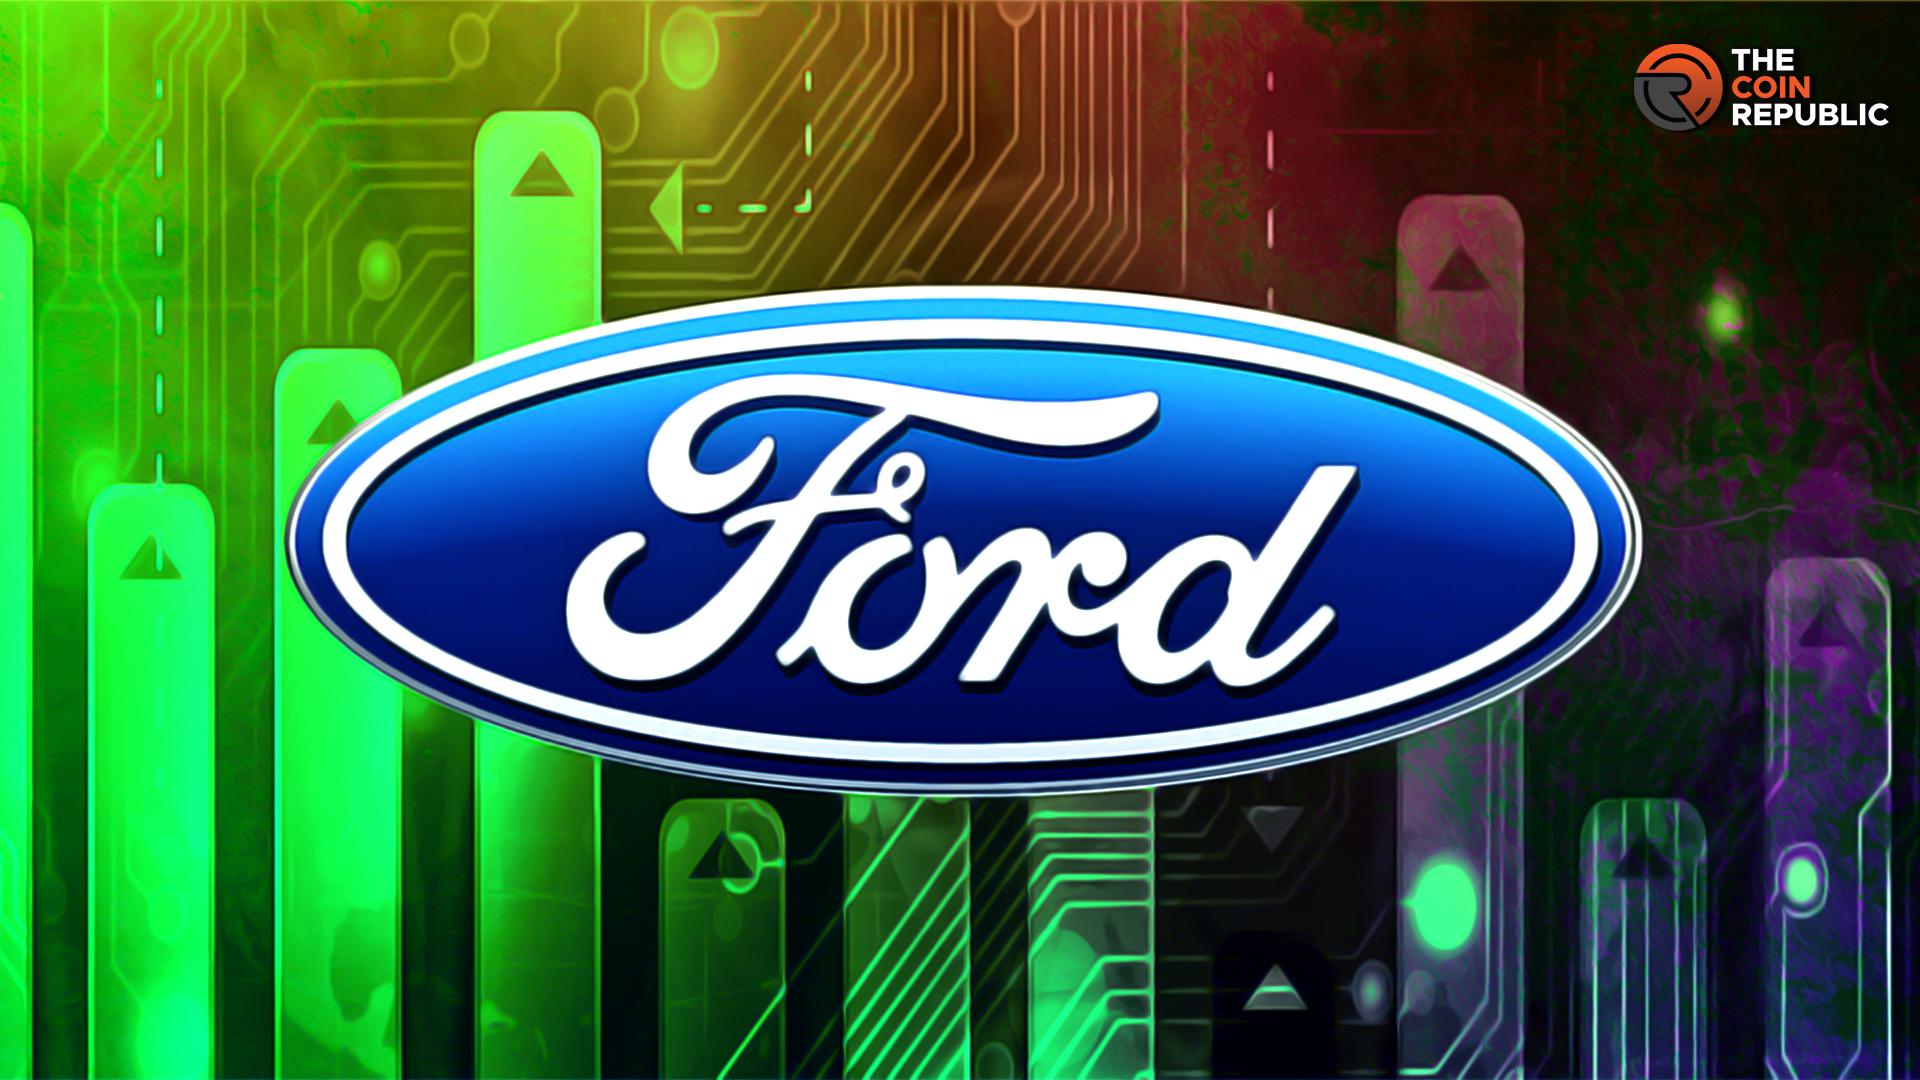 Ford Stock Price: Q3 Earning Reports are Here, Start of Uptrend?